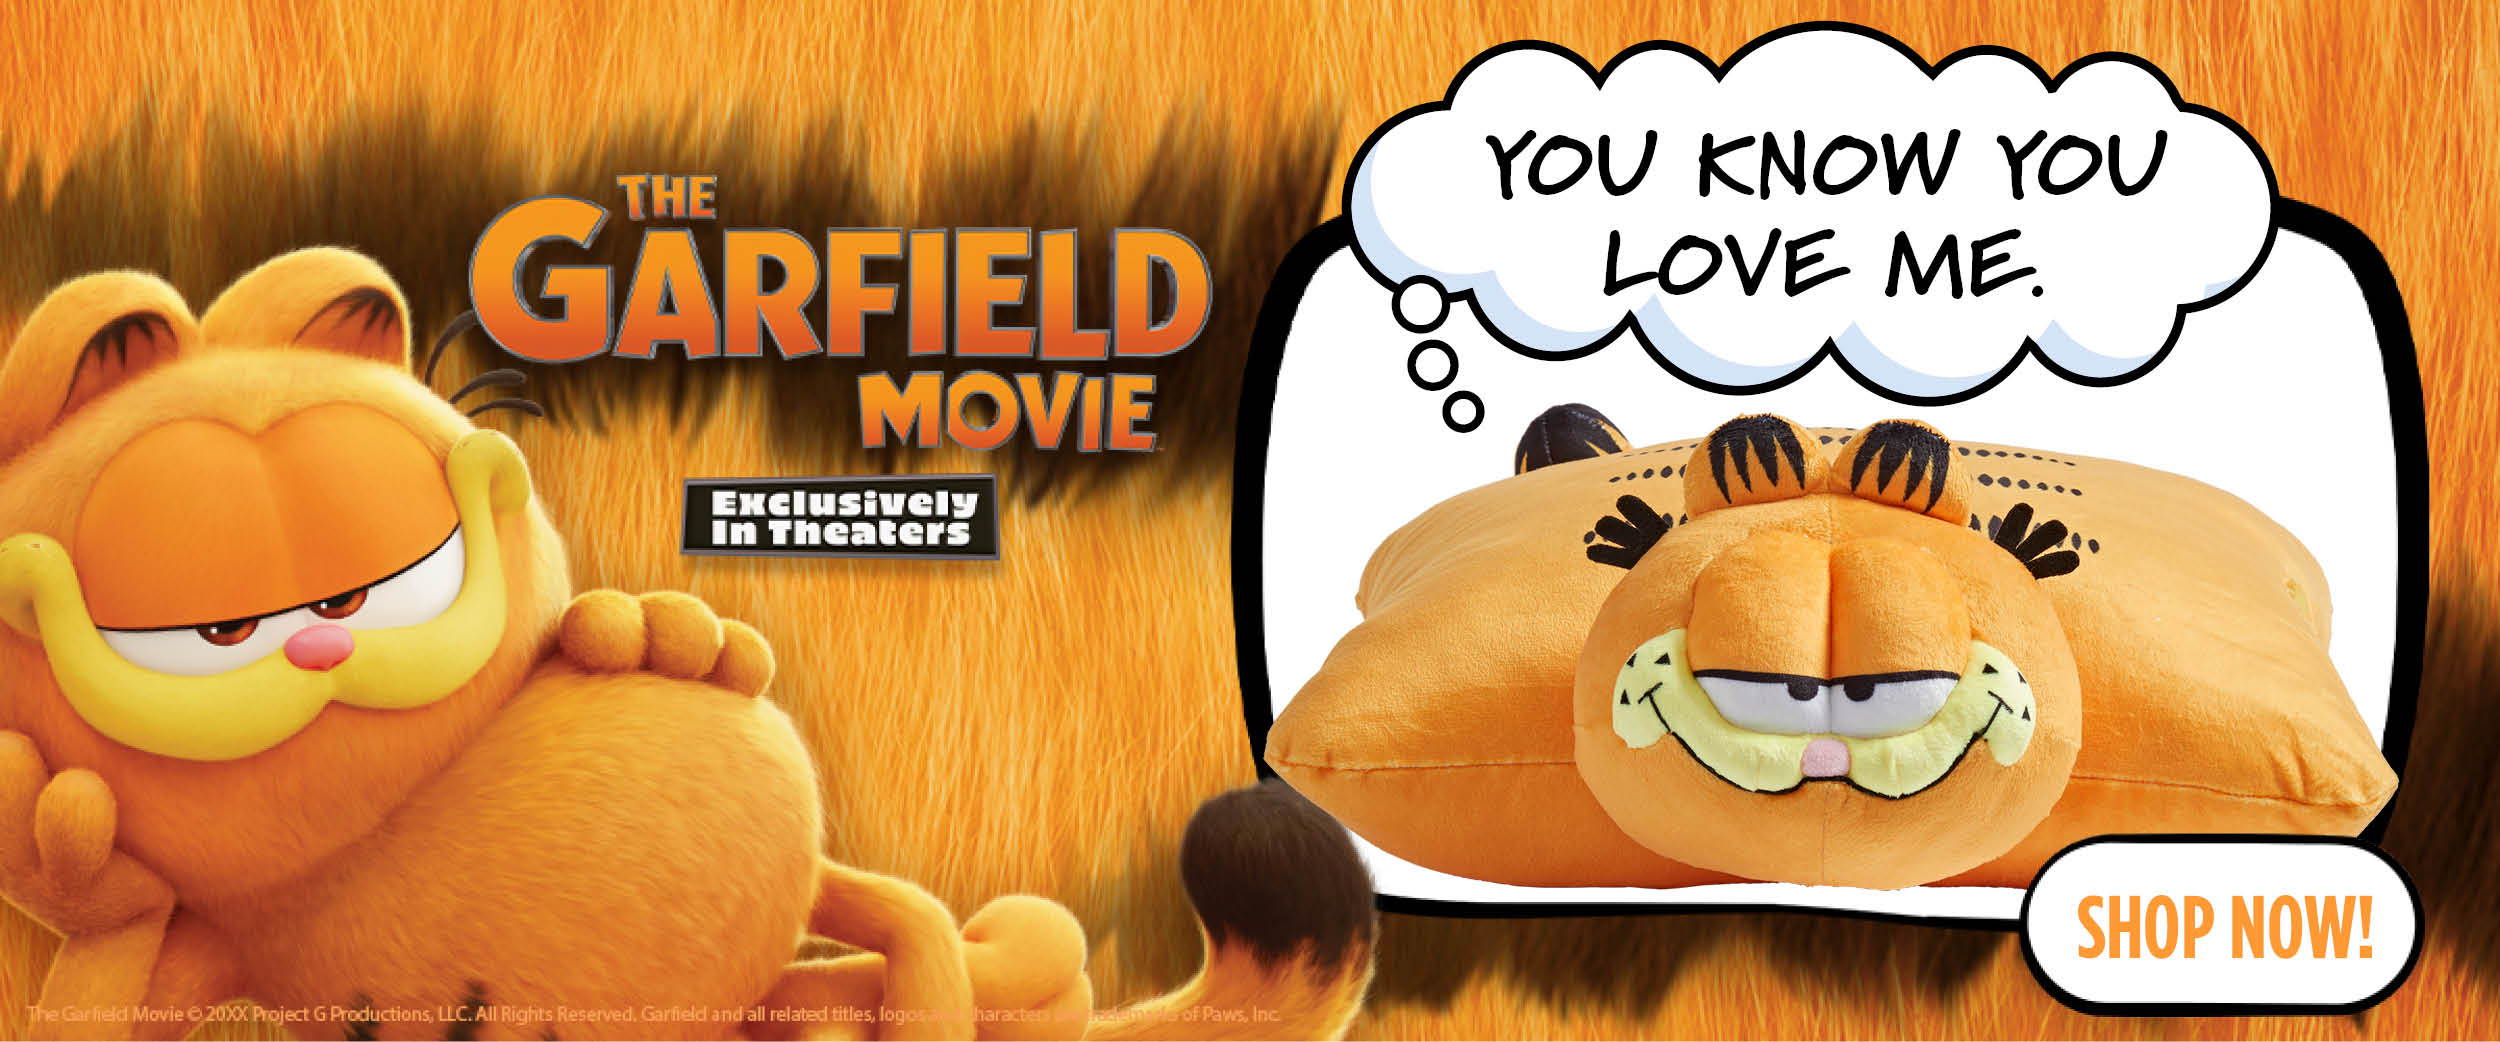 The Garfield Movie! Exclusively in Theaters May 24th! Shop Garfield Pillow Pet Now!